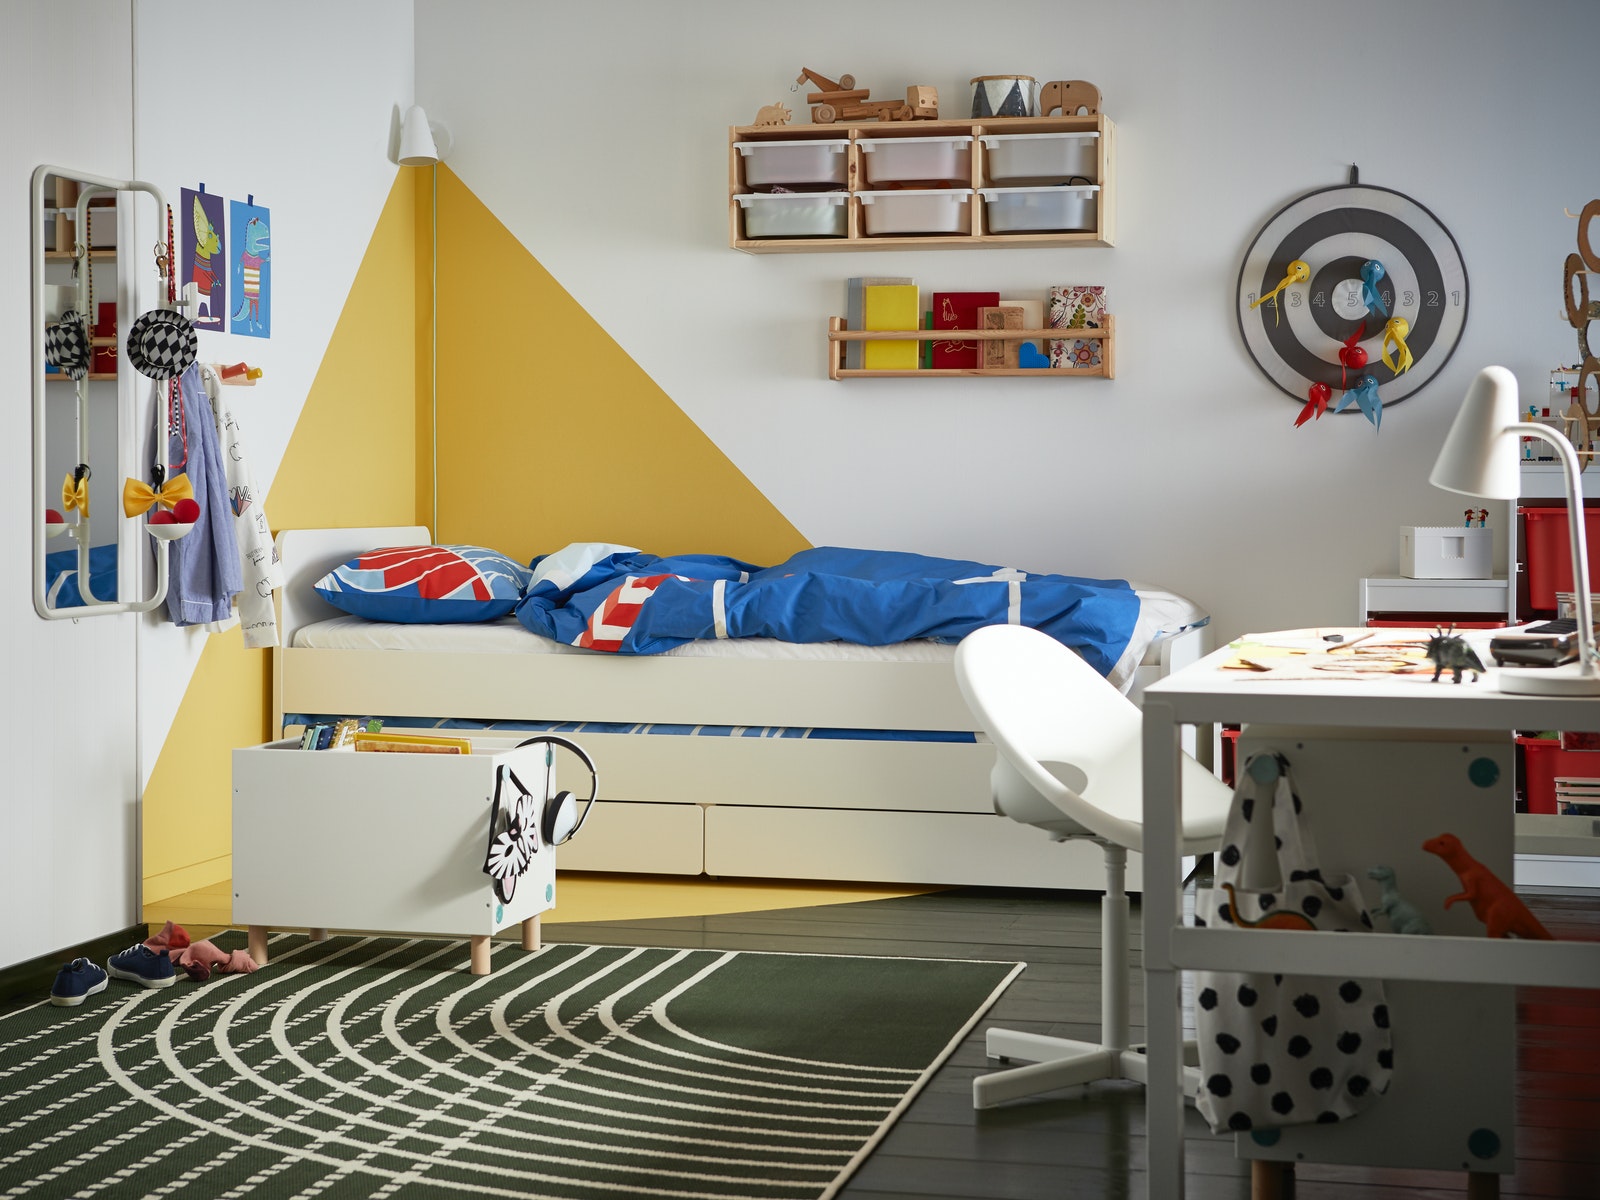 IKEA - A playful children's bedroom with plenty of clever storage